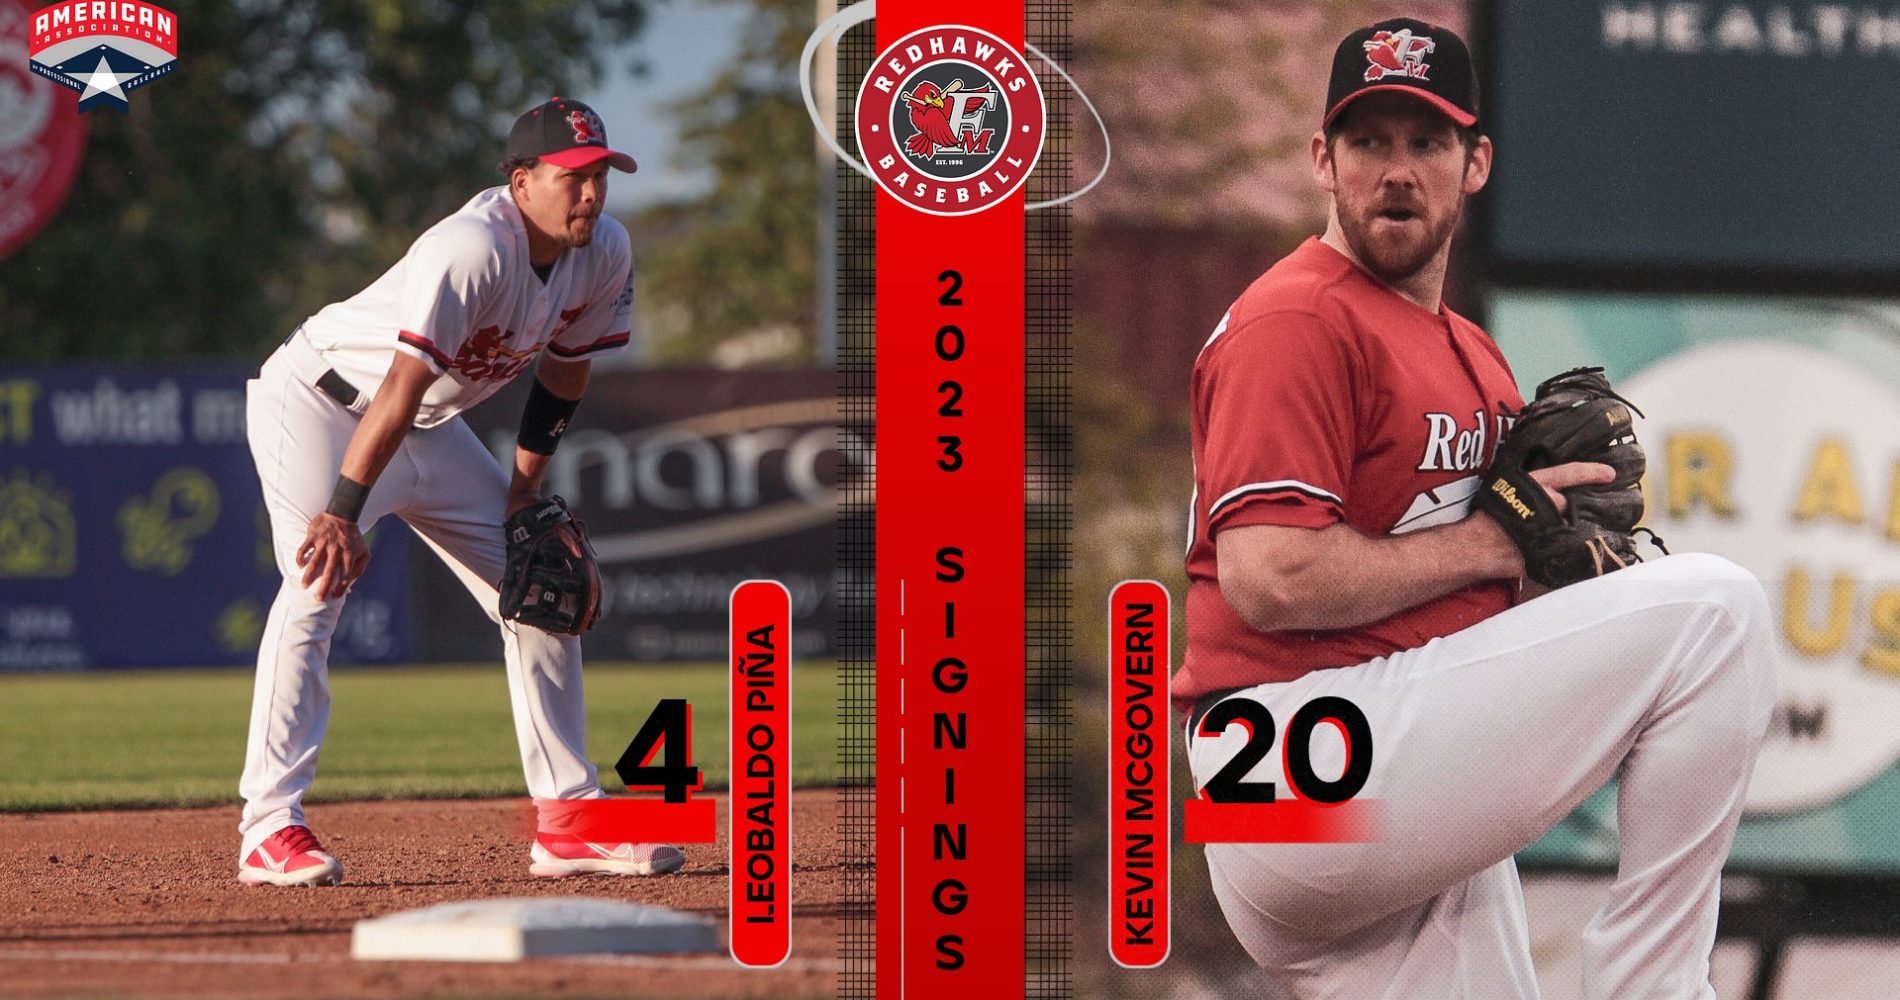 RedHawks Re-sign Pina and McGovern for 2023 Season